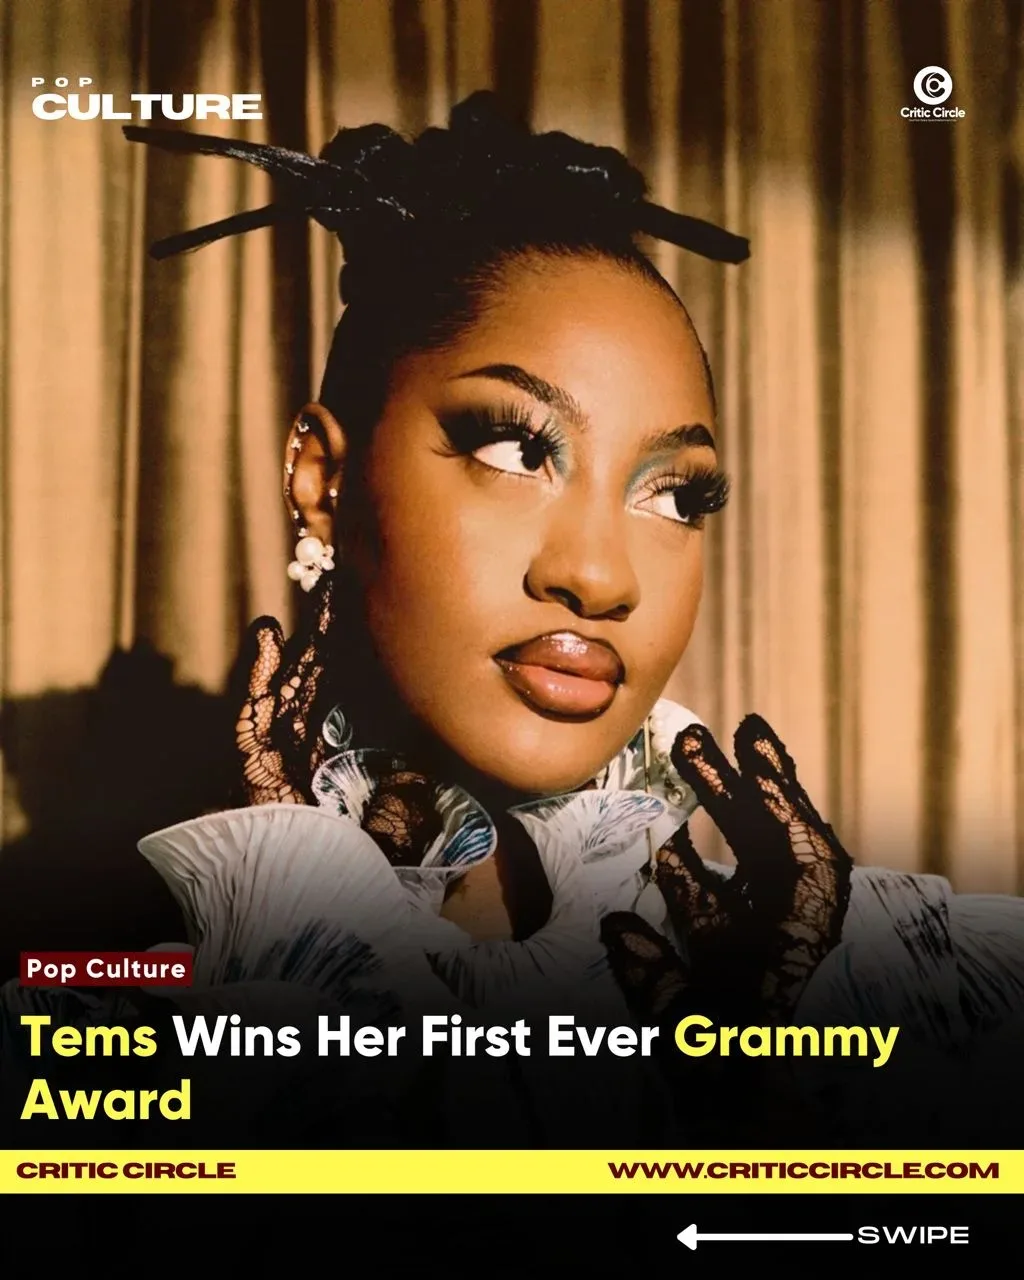 Tems accomplished and made another milestone for Nigerian music at the 65th Grammy Awards in 2023, beating out famous performers such as to win her maiden grammy award and becoming the first female Nigerian musician to do so.